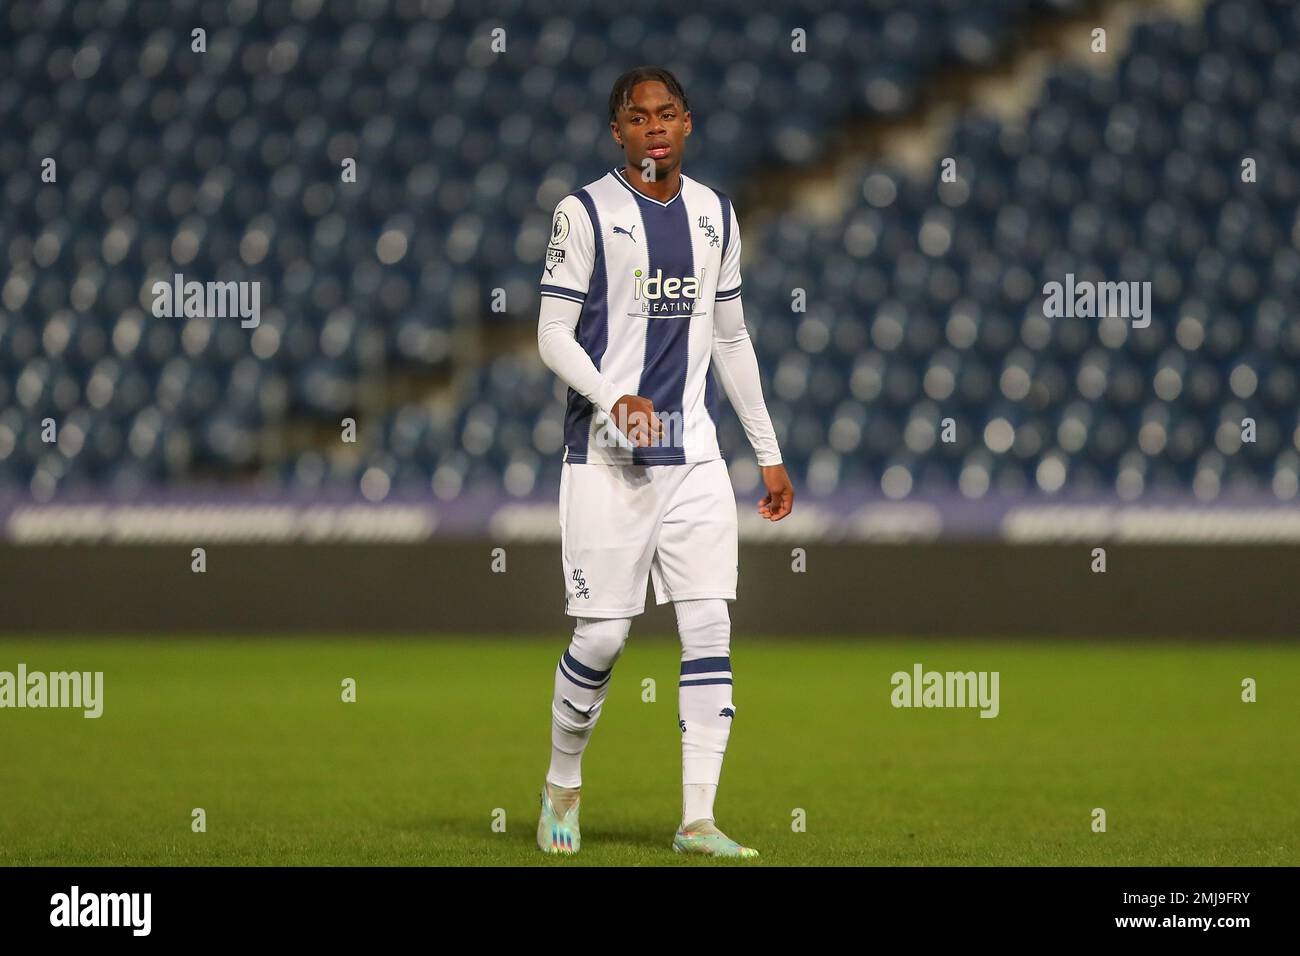 West Bromwich, UK. 27th Jan, 2023. Akeel Higgins of West Bromwich Albion in action during the Premier League 2 U23 match West Bromwich Albion U23 vs Aston Villa U23 at The Hawthorns, West Bromwich, United Kingdom, 27th January 2023 (Photo by Gareth Evans/News Images) Credit: News Images LTD/Alamy Live News Stock Photo